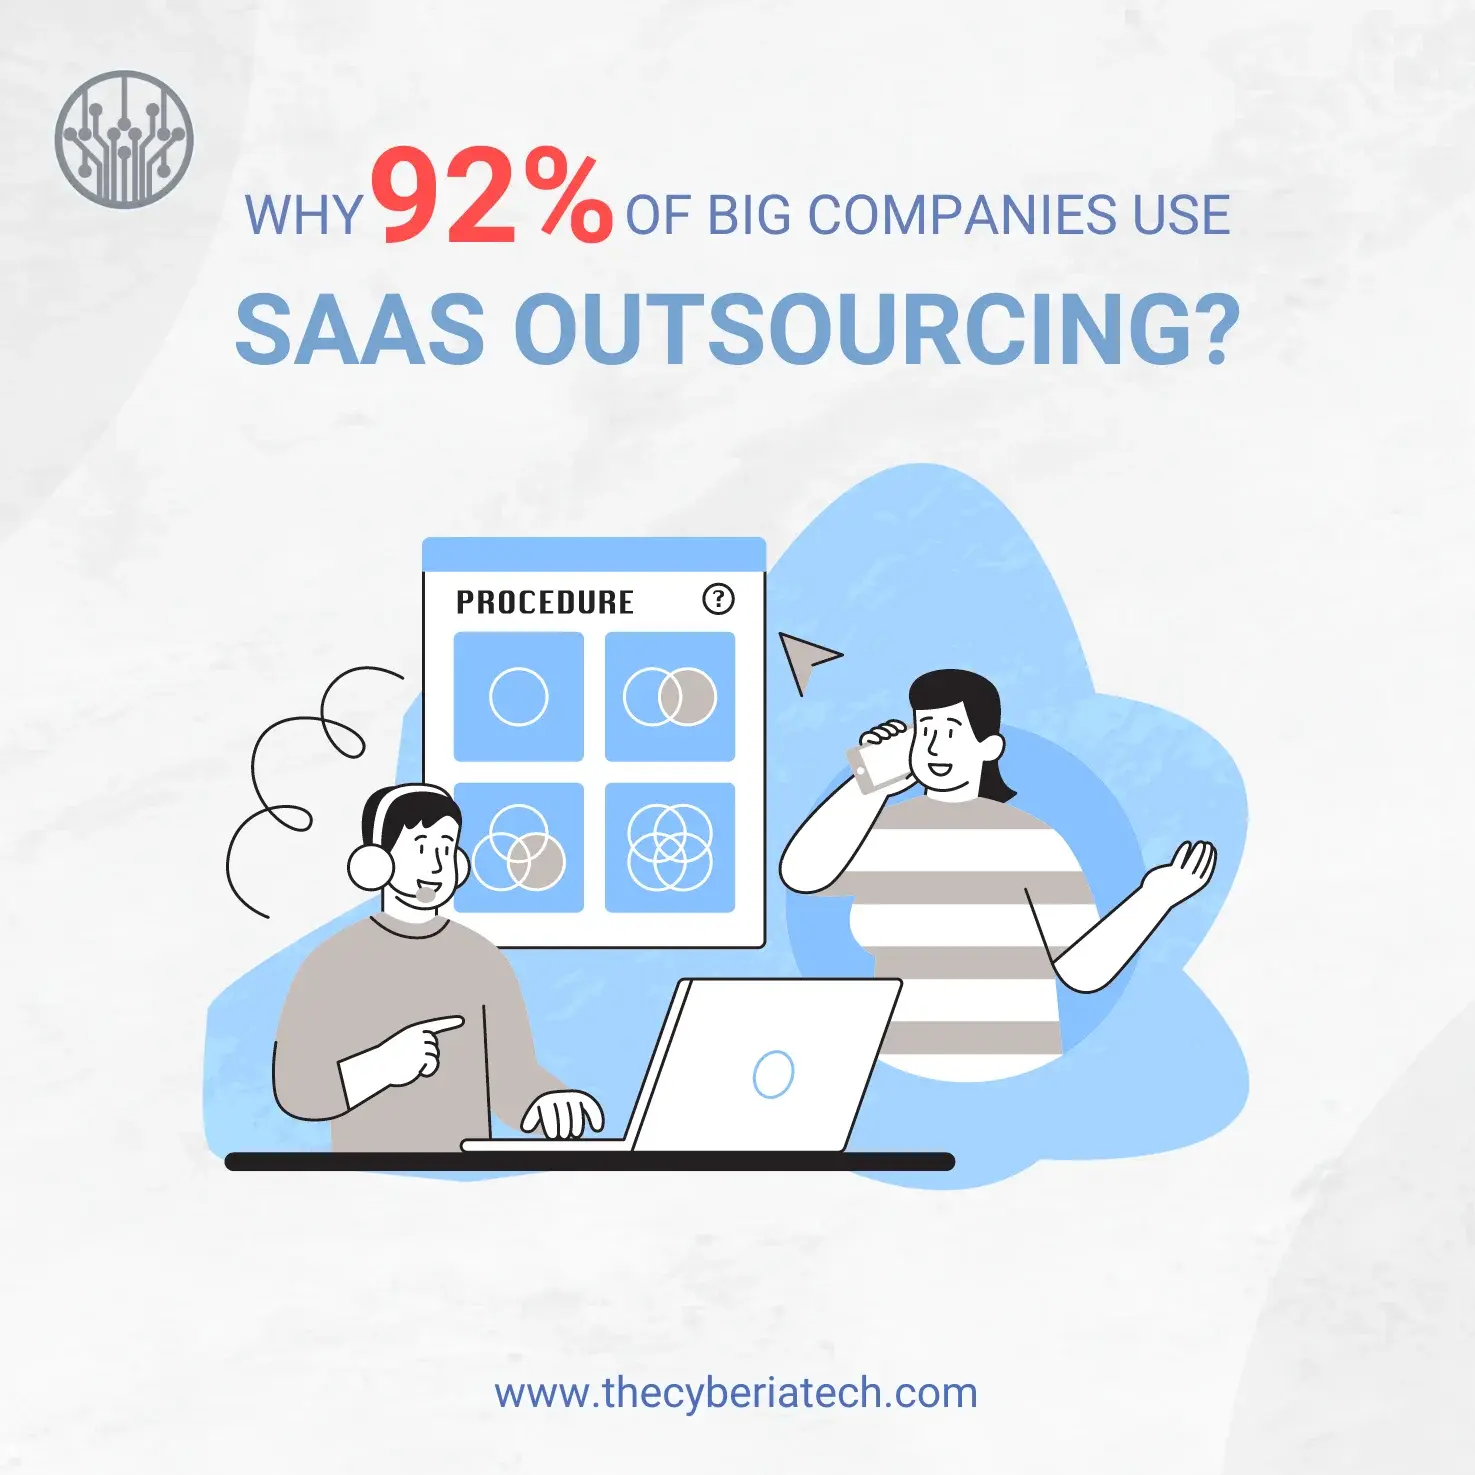 Why big companies use SaaS Outsourcing